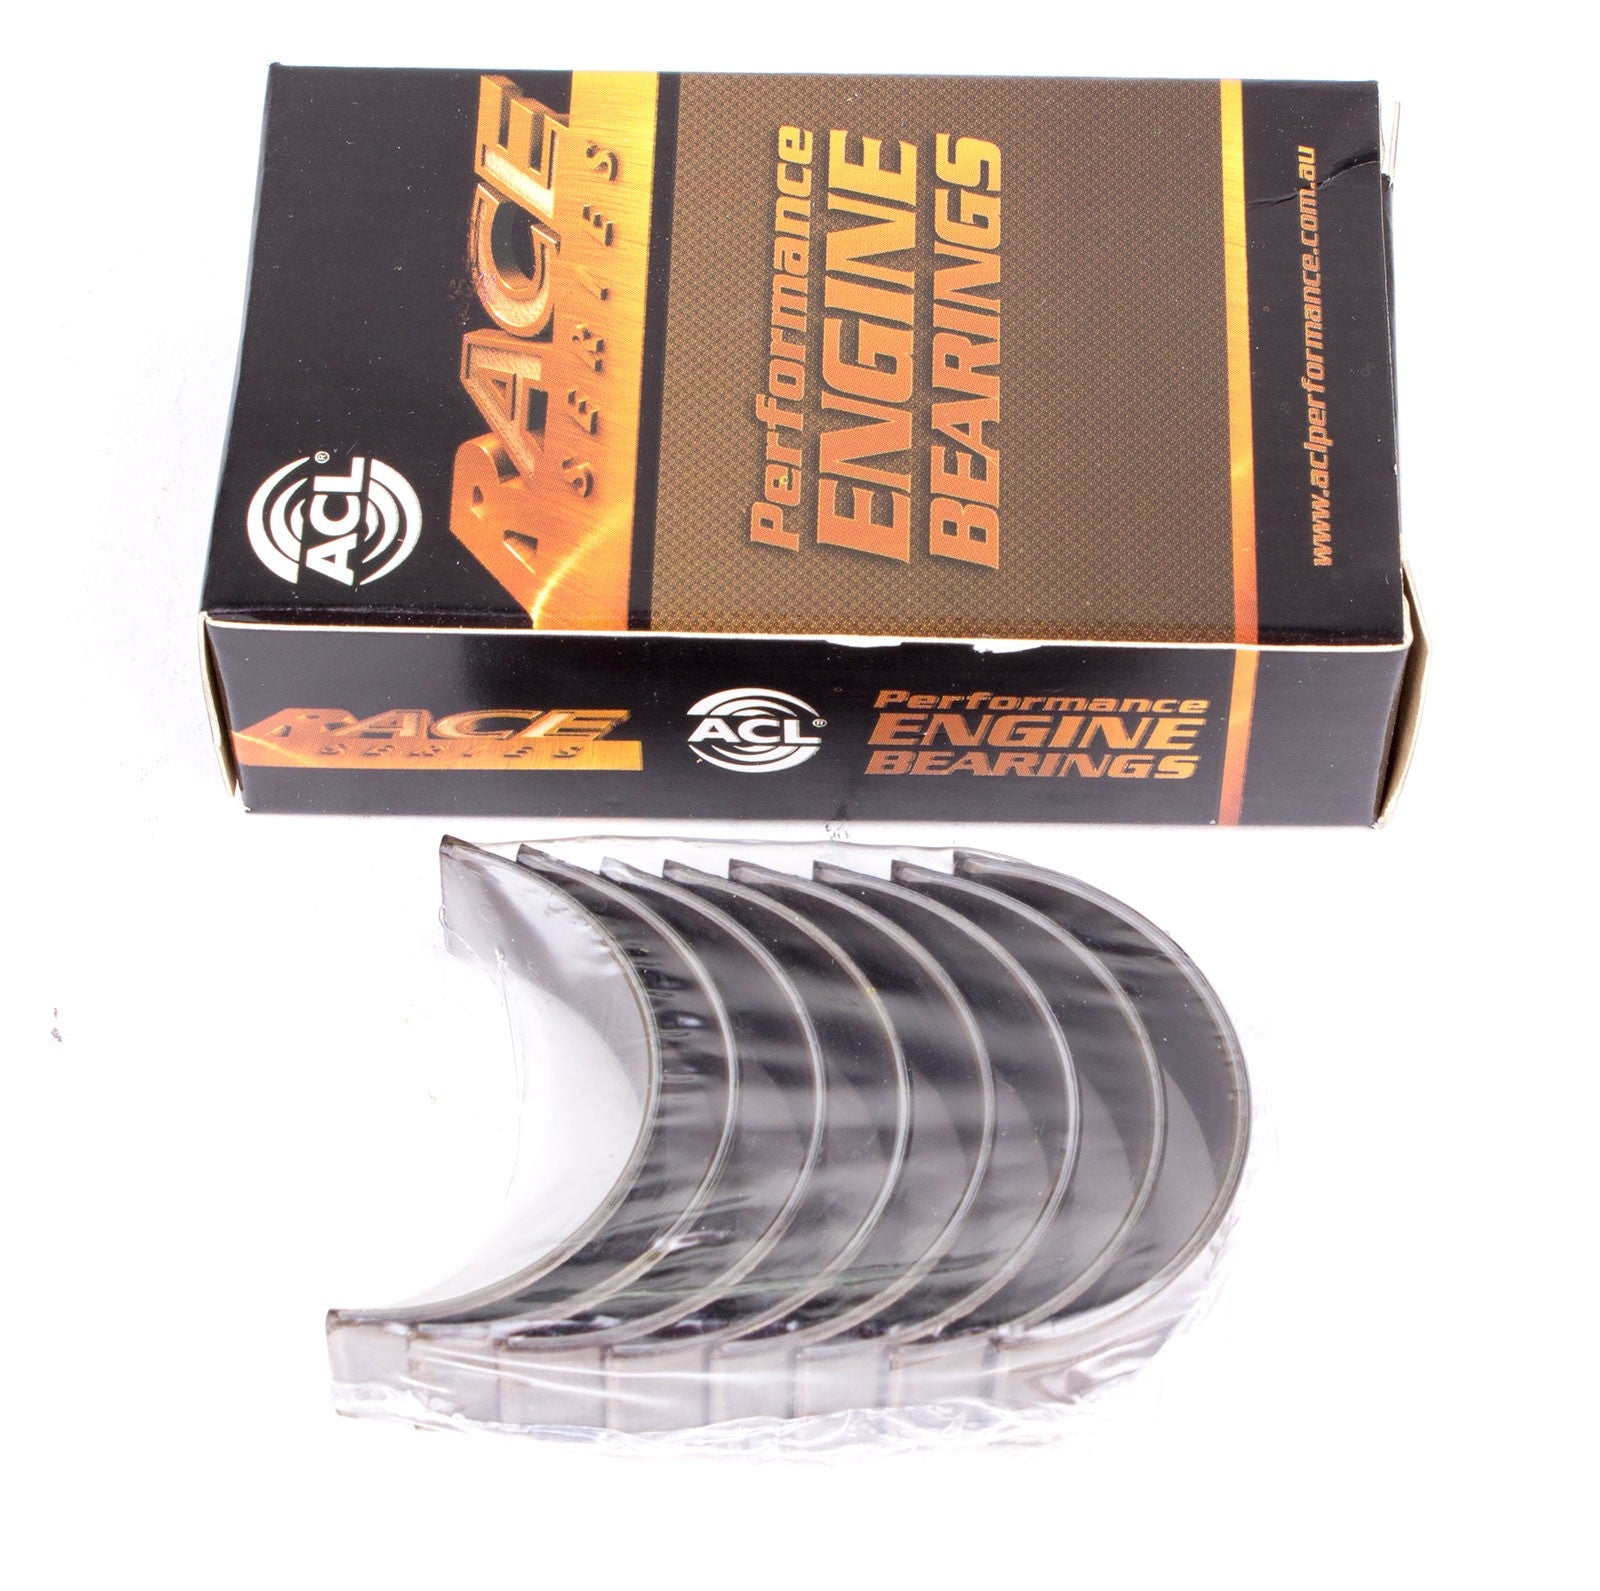 ACL 5M2995H-.025 Main bearing set (ACL Race Series) Photo-0 